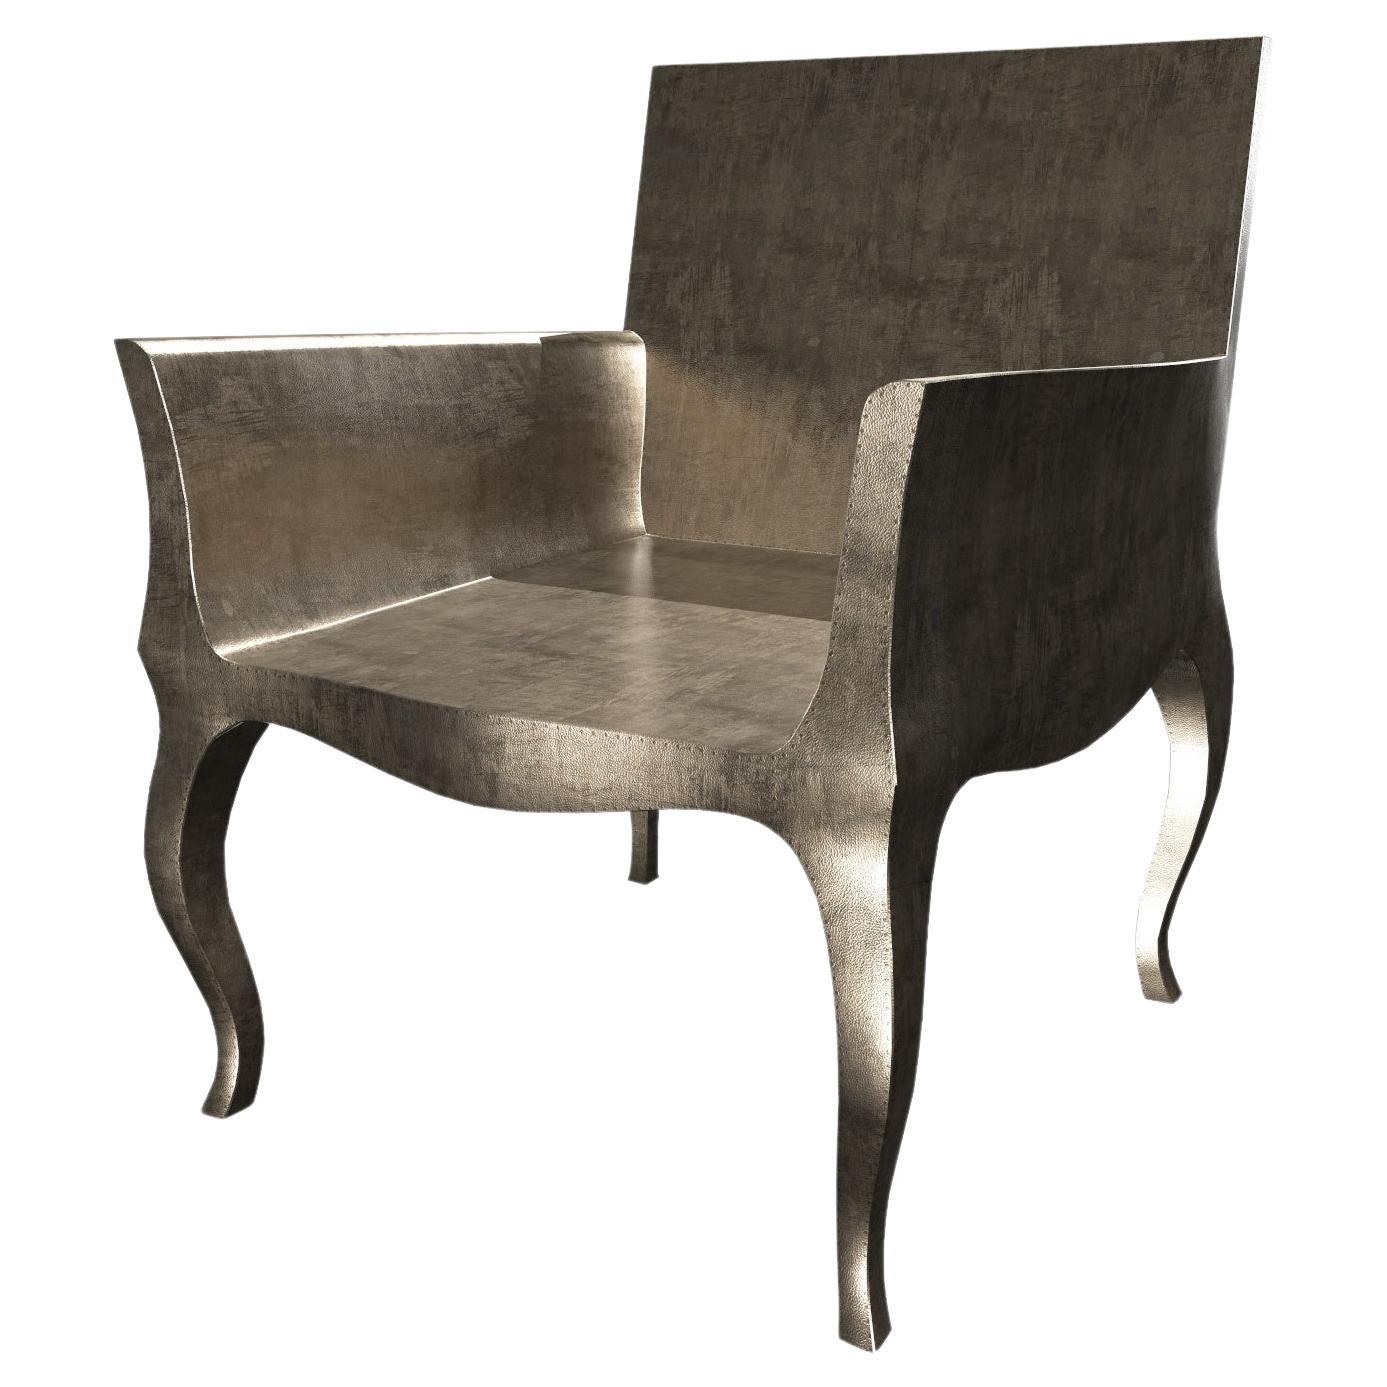 Antique Art Deco Chairs Fine Hammered in Antique Bronze by Paul Mathieu